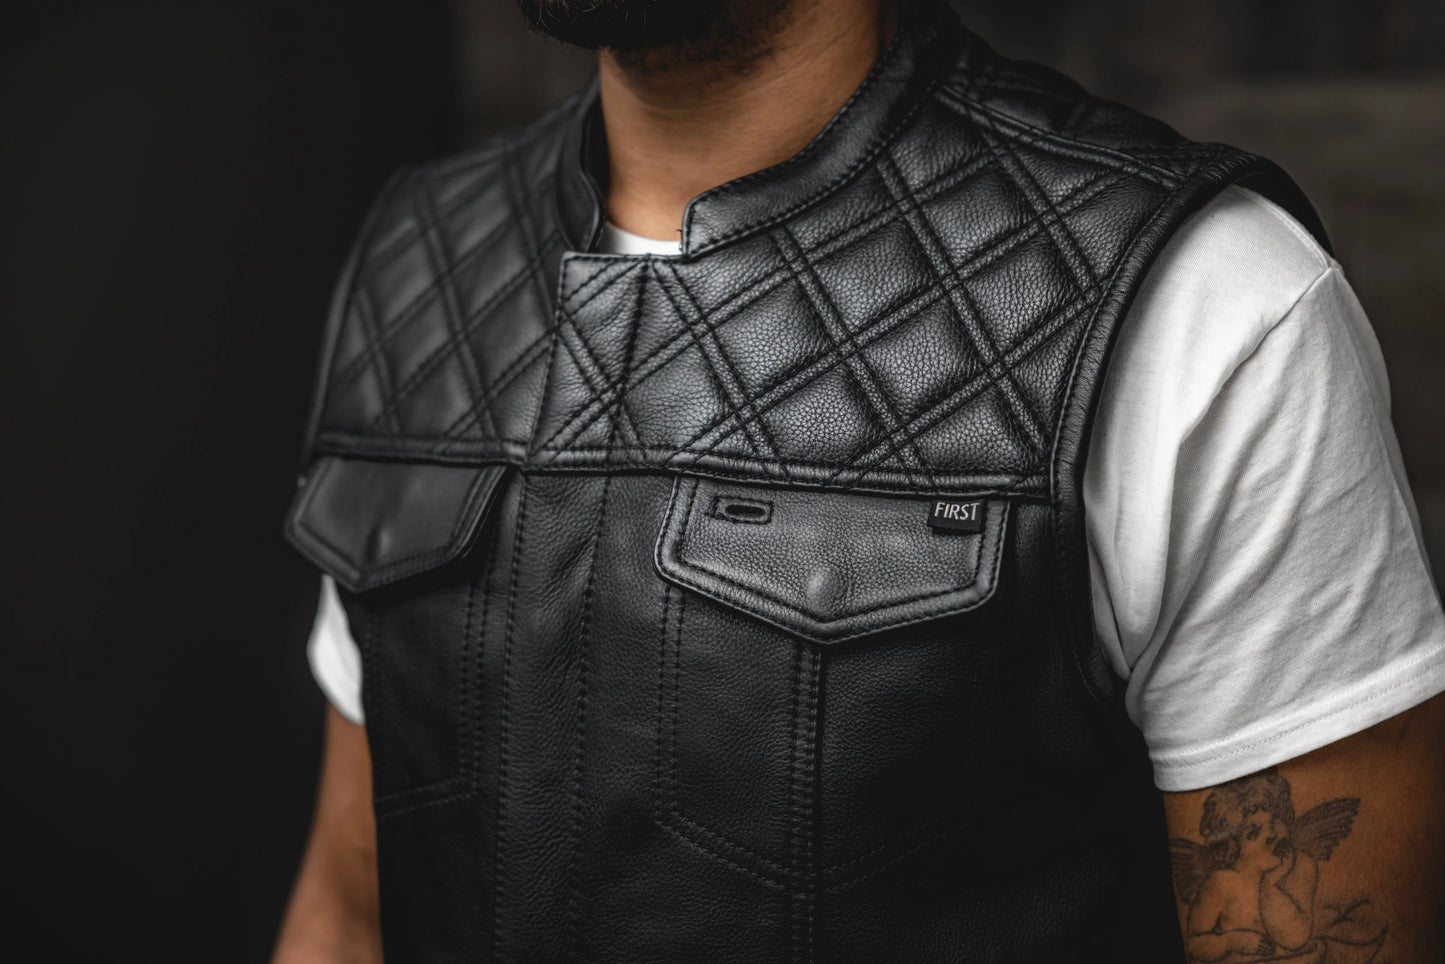 FMCo SIGNATURE LEATHER VEST - Extreme Biker Leather